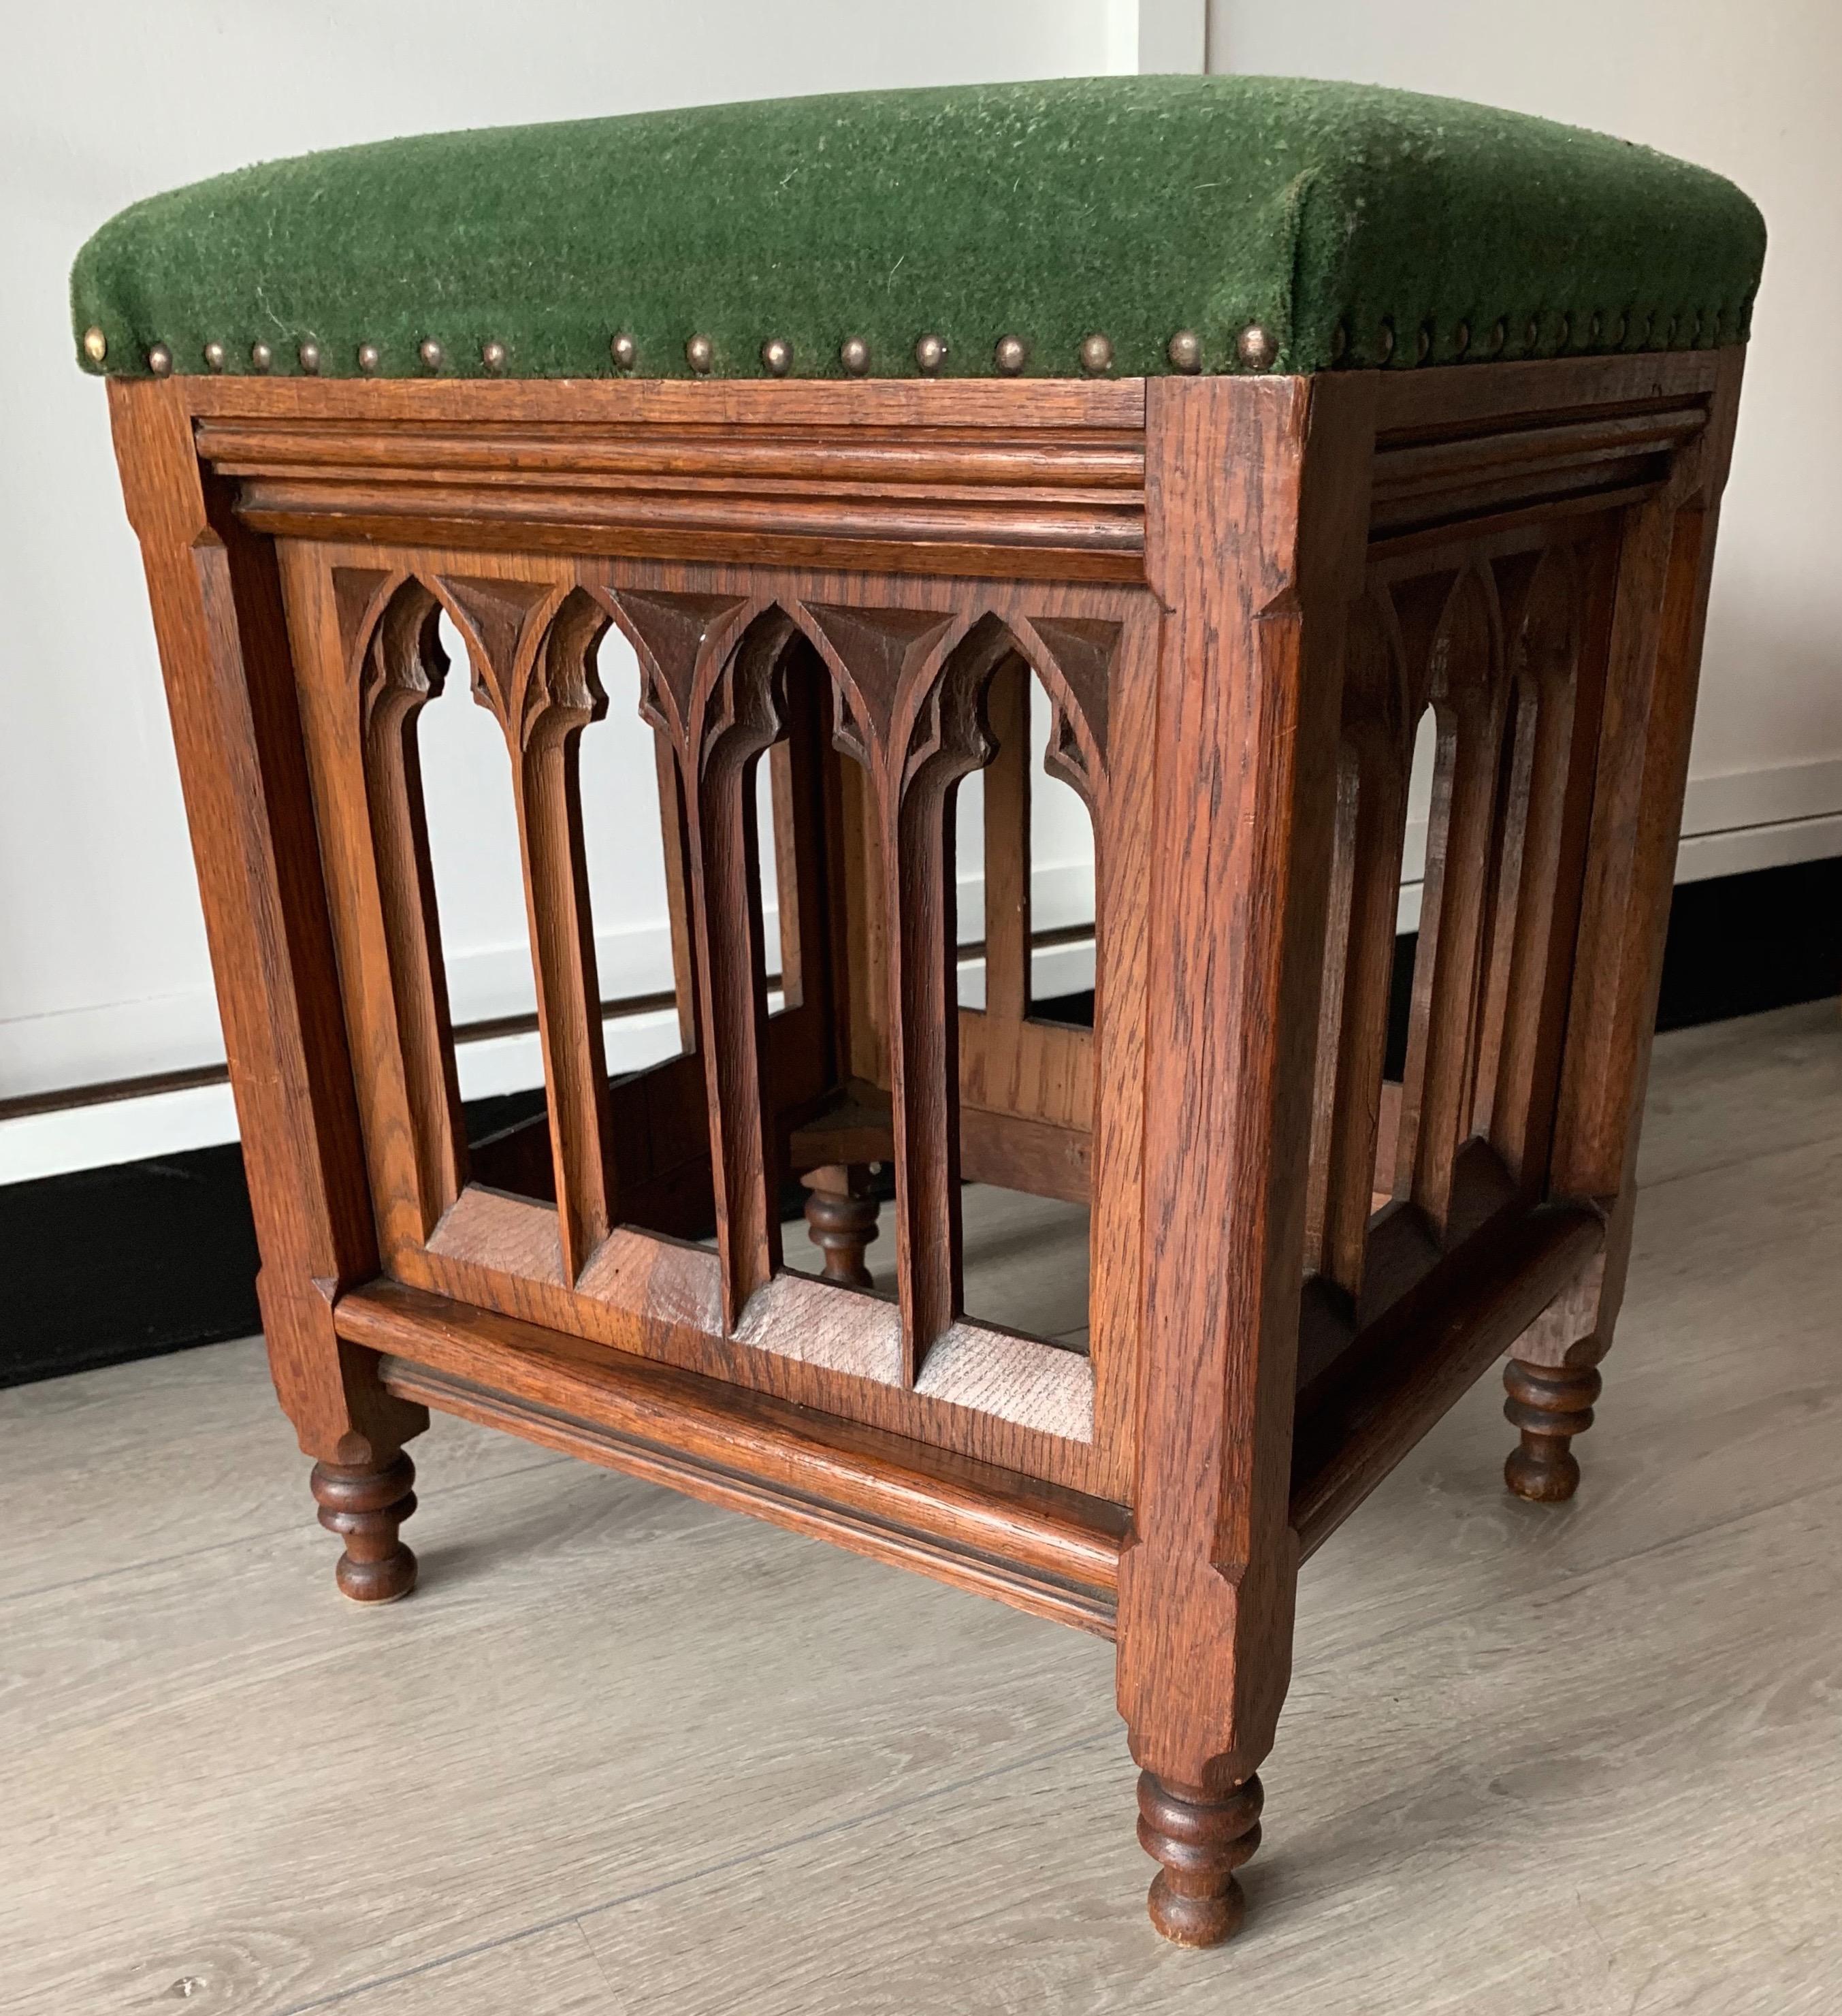 Antique, stunning and practical Gothic stool from circa 1900.

This striking and perfect size Gothic stool is as stable as the day it was made and the woodwork is in excellent condition. All handcrafted out of solid oak this stool is decorated all